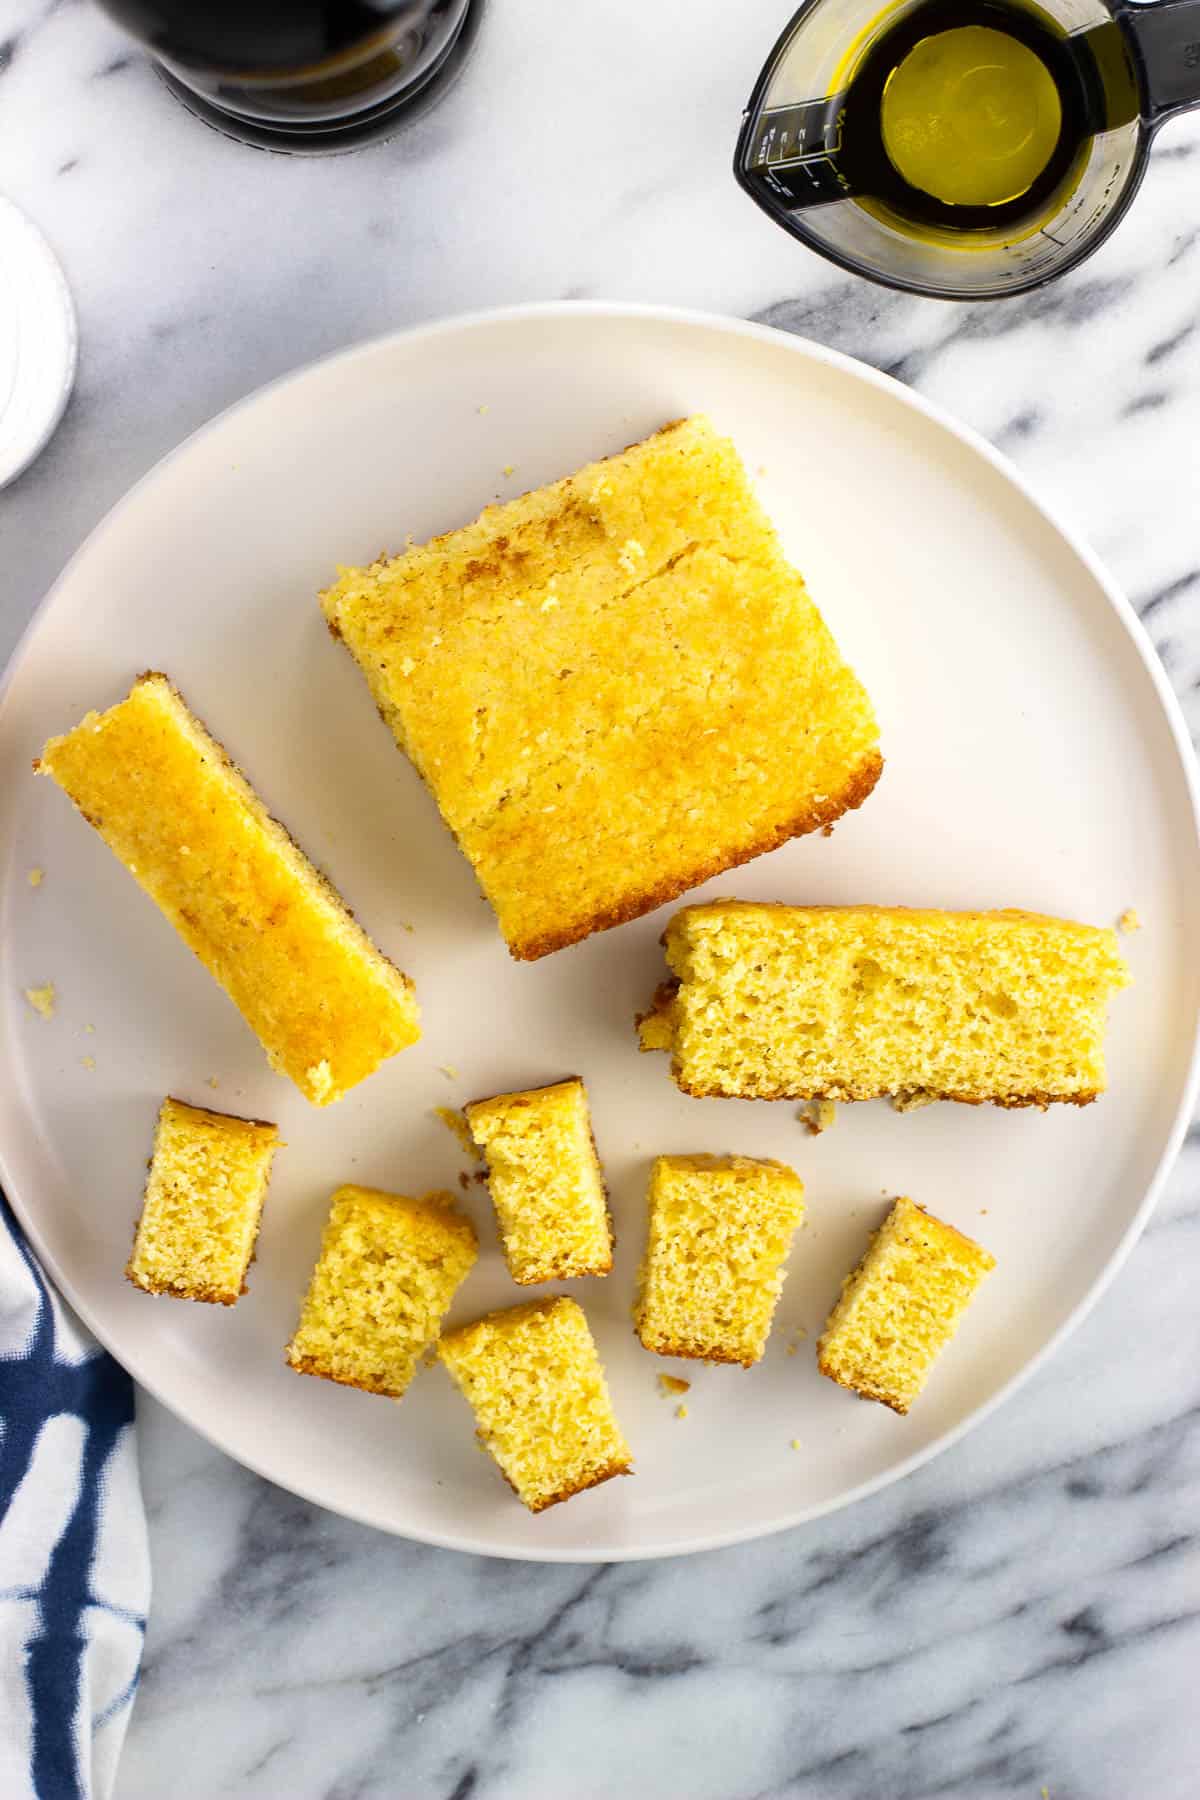 Leftover pieces of cornbread being sliced into cubes.